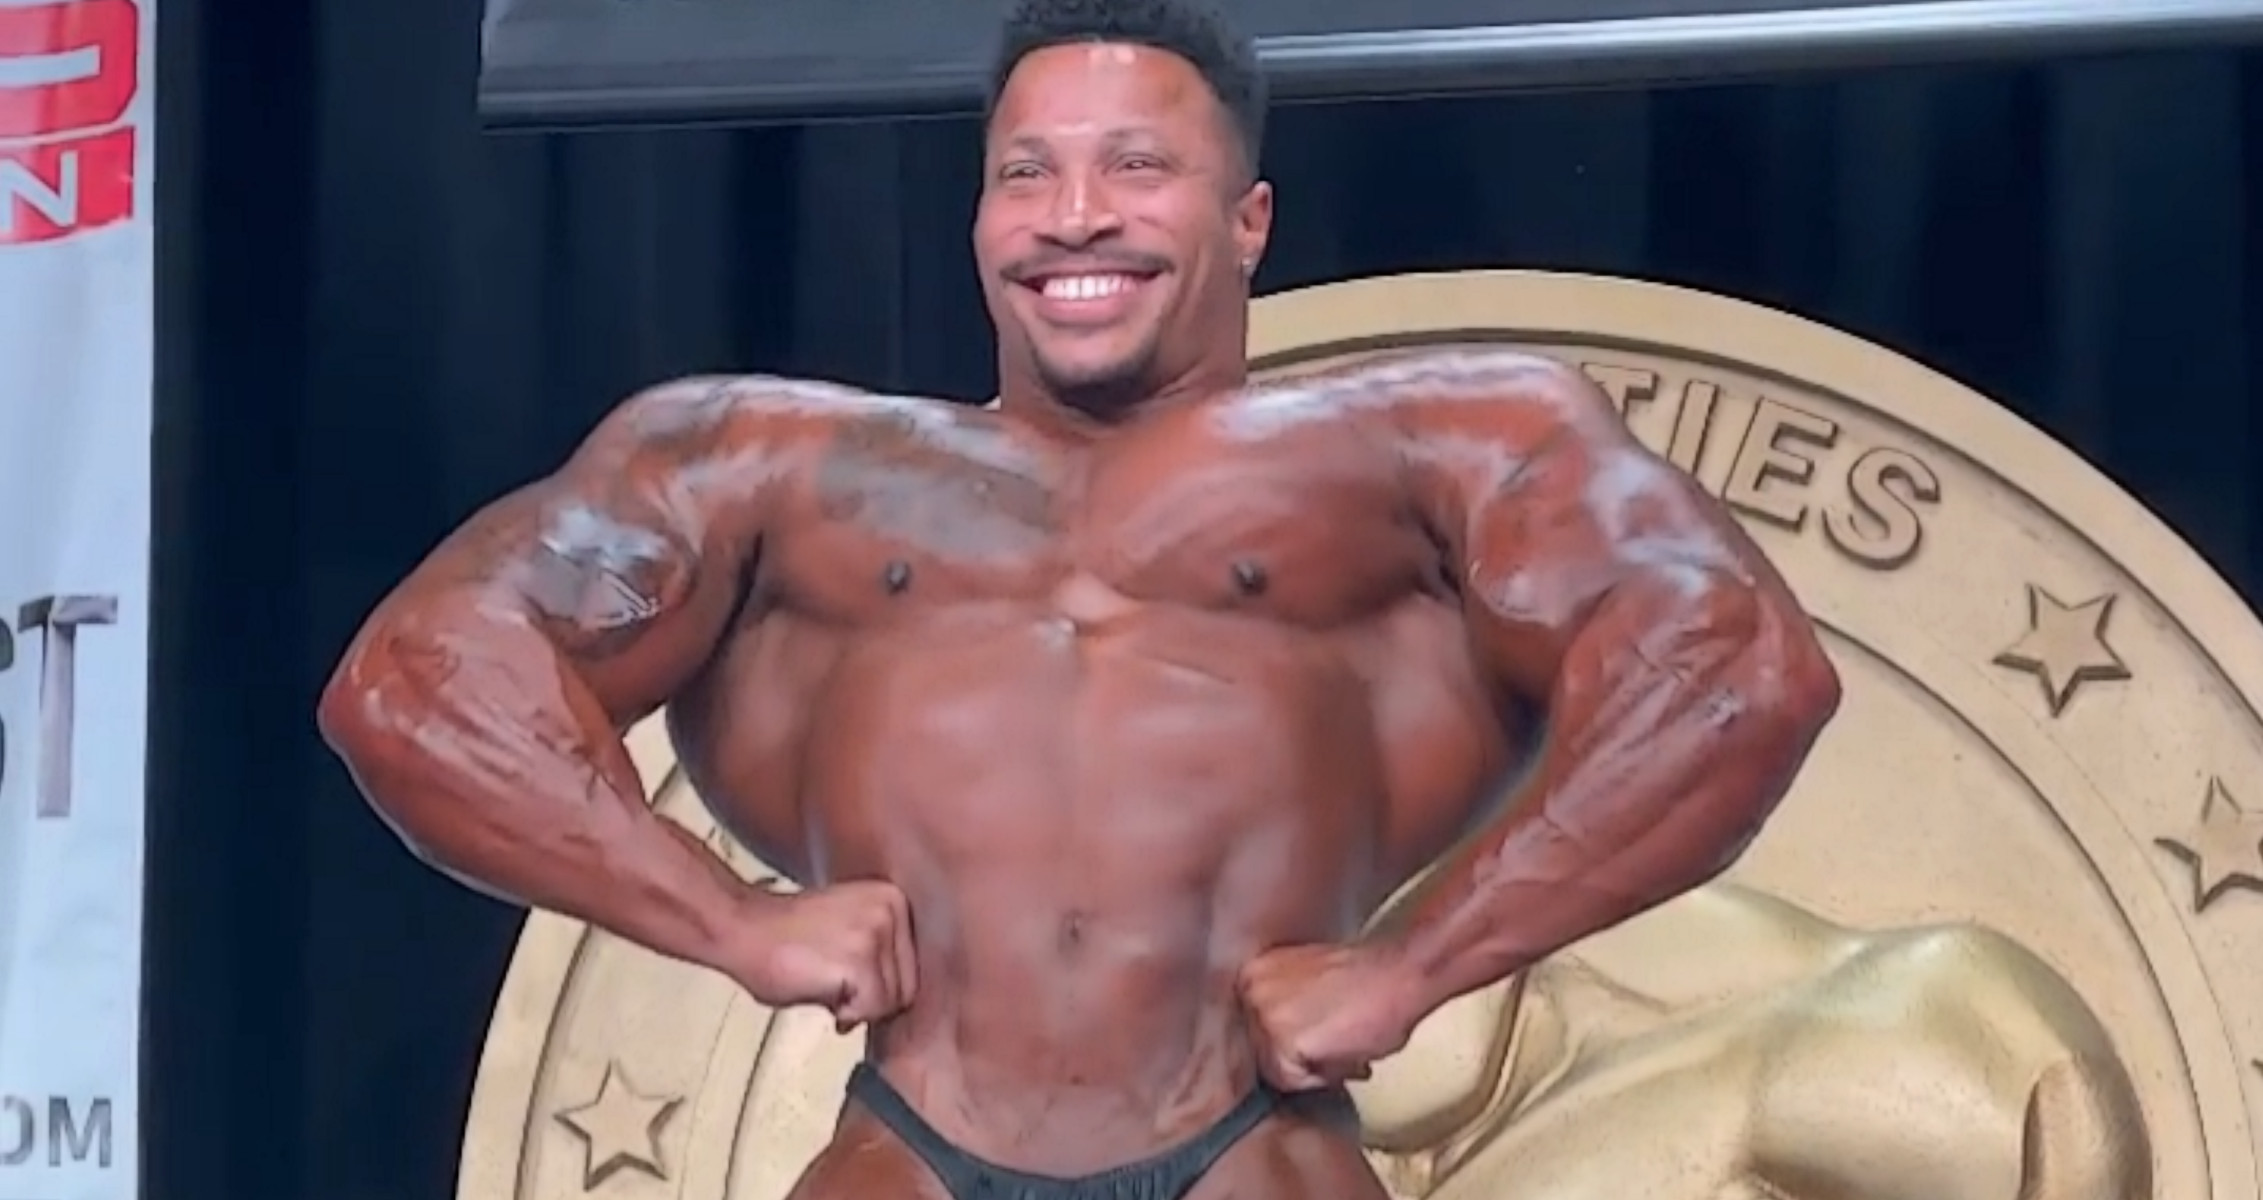 Patrick Moore Looks Super Jacked in Latest Guest Posing